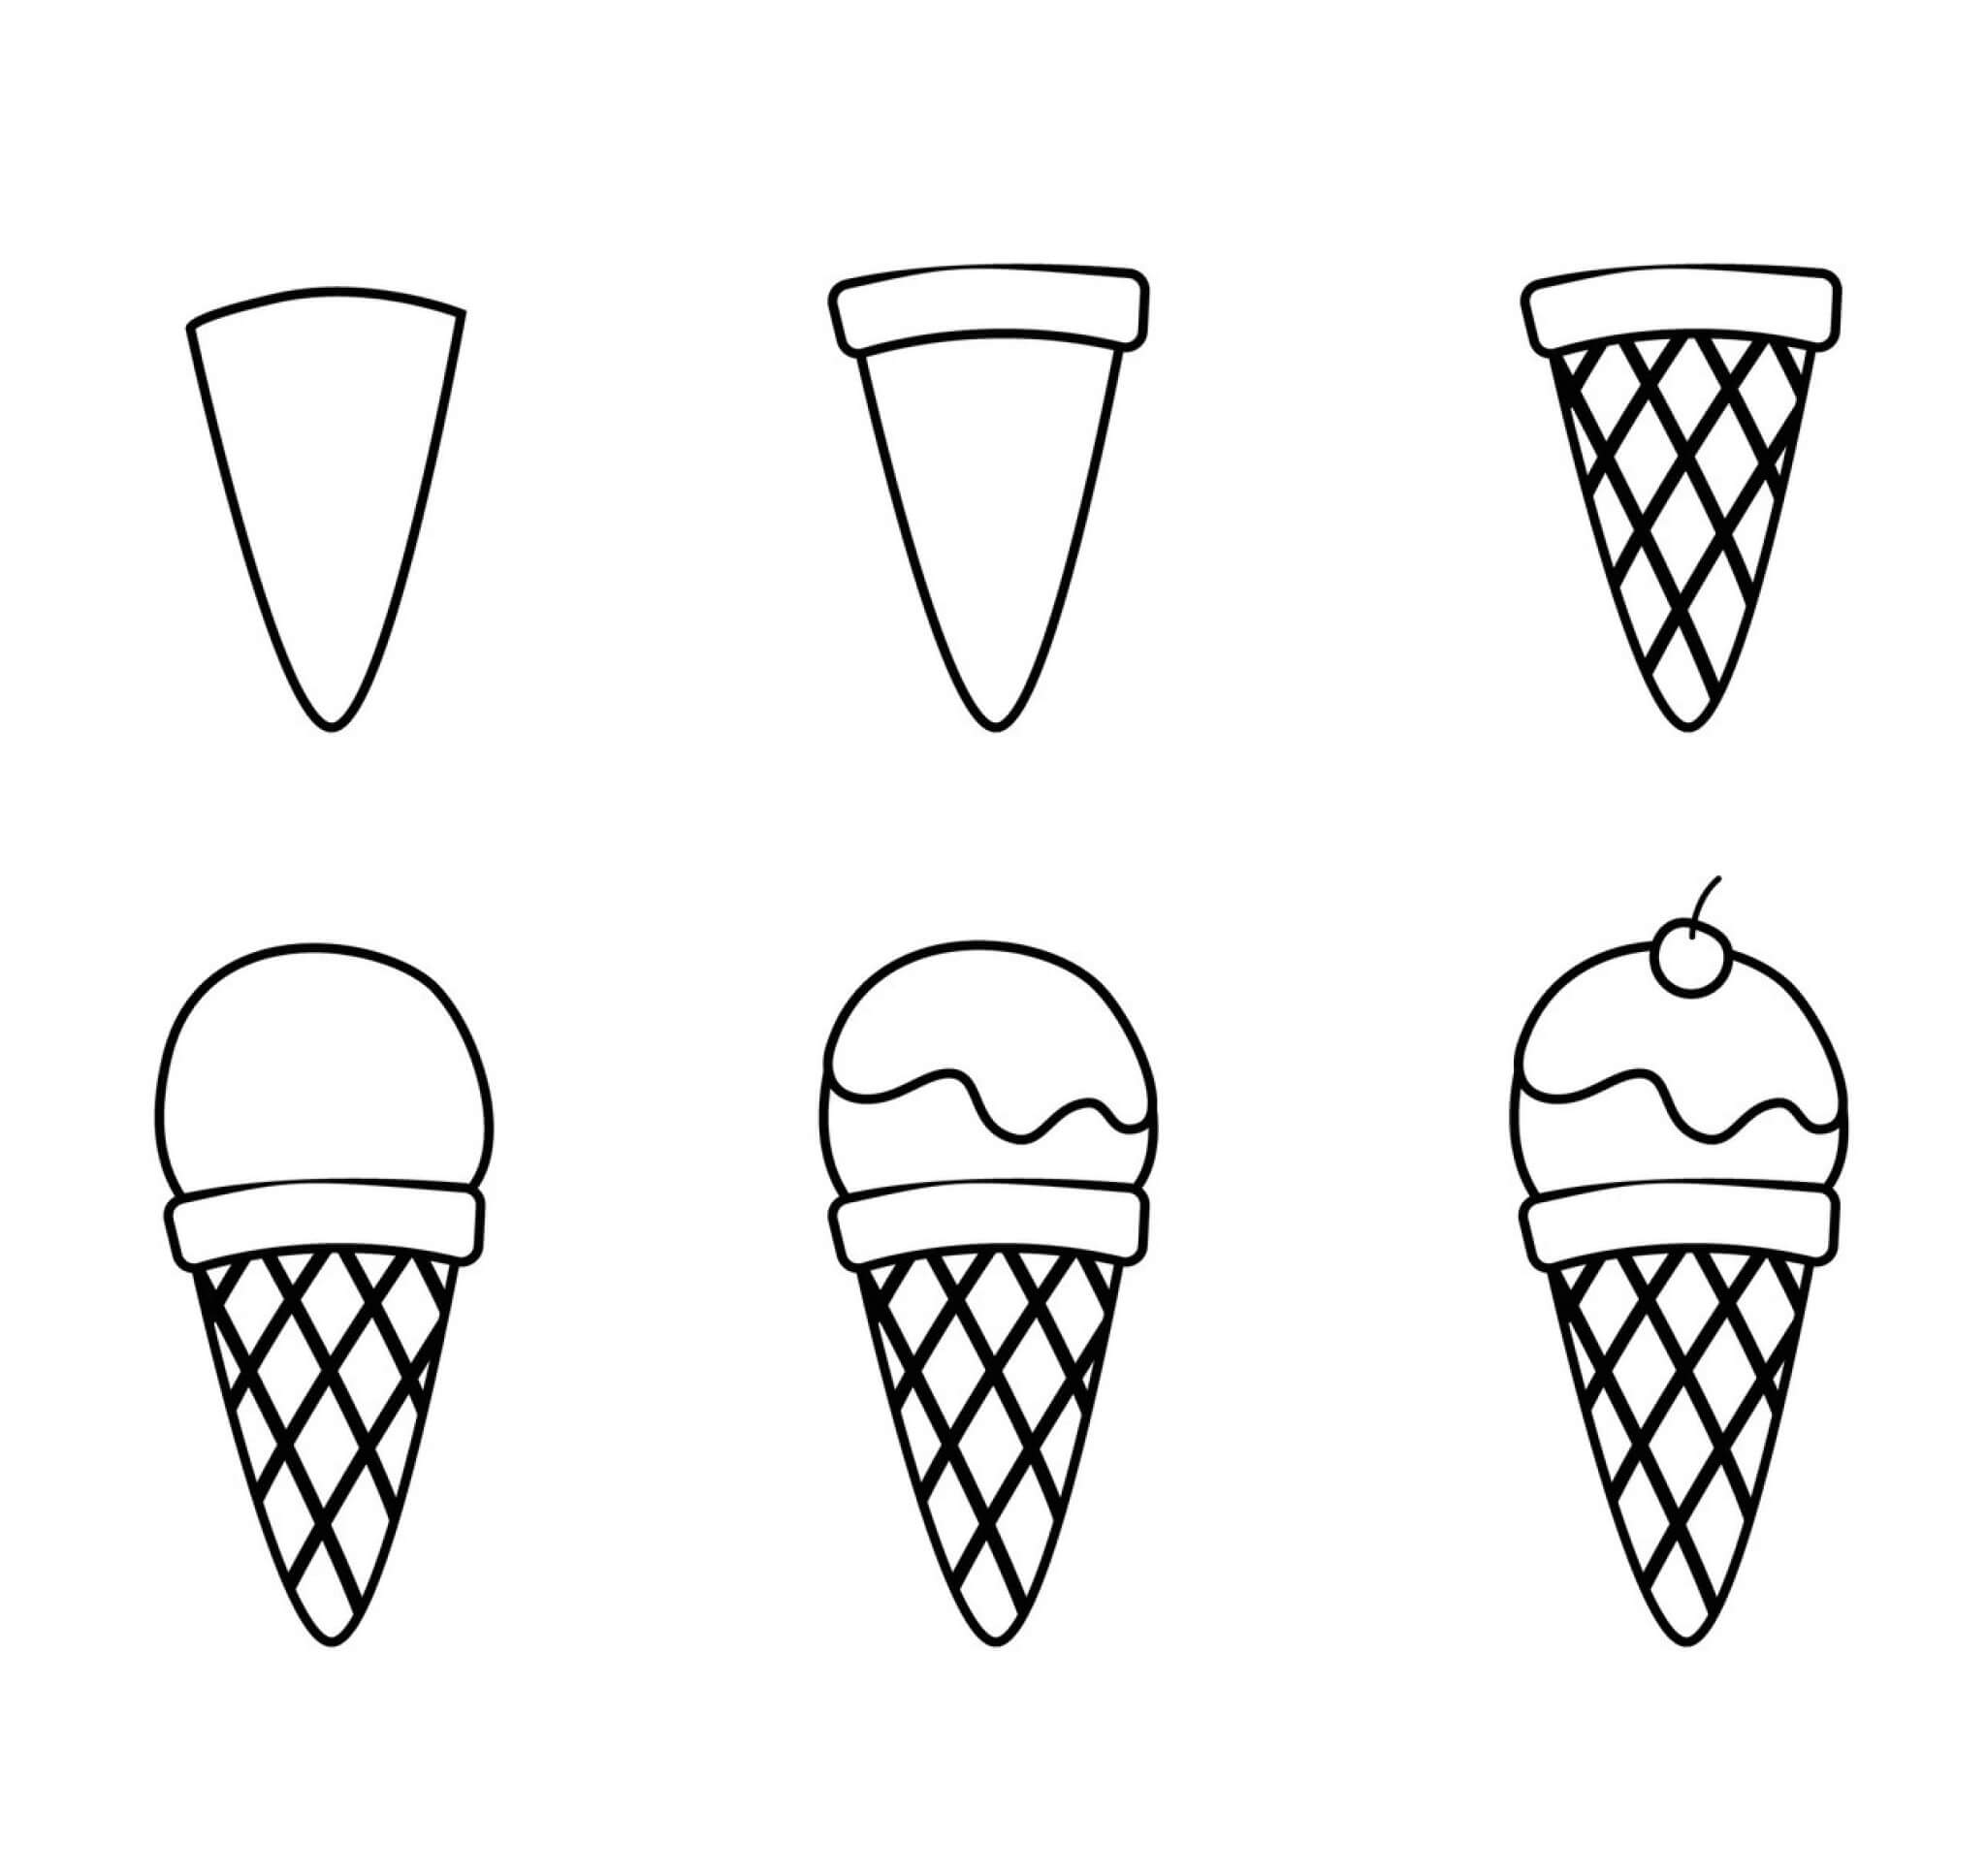 Drawing a simple ice cream stick Drawing Ideas